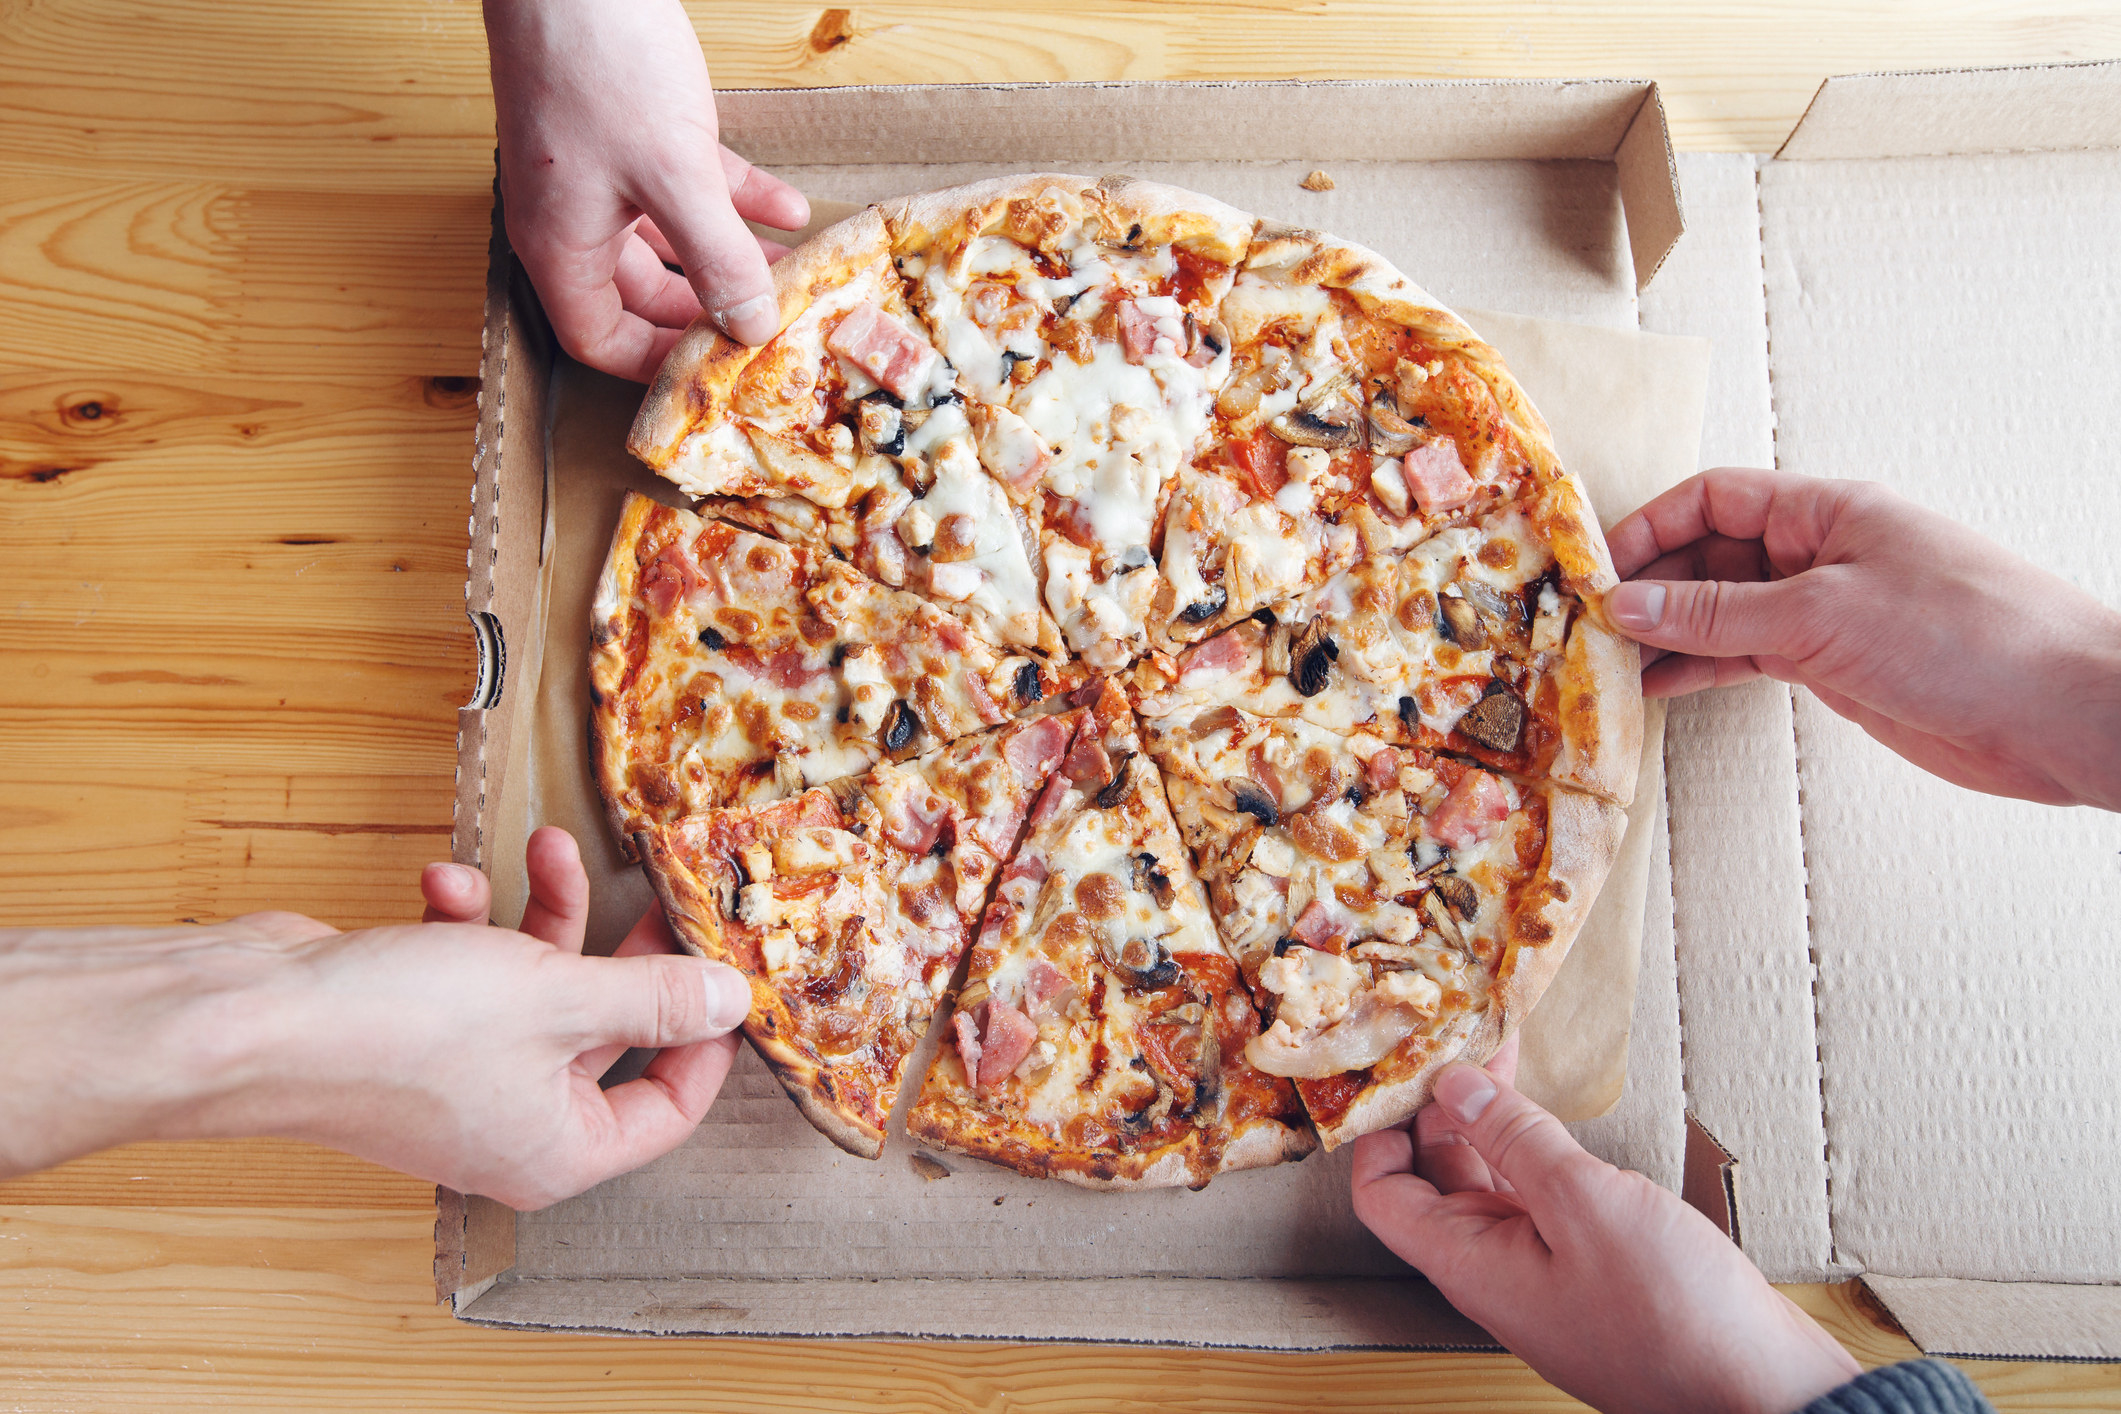 Hands grab slices of delivery pizza